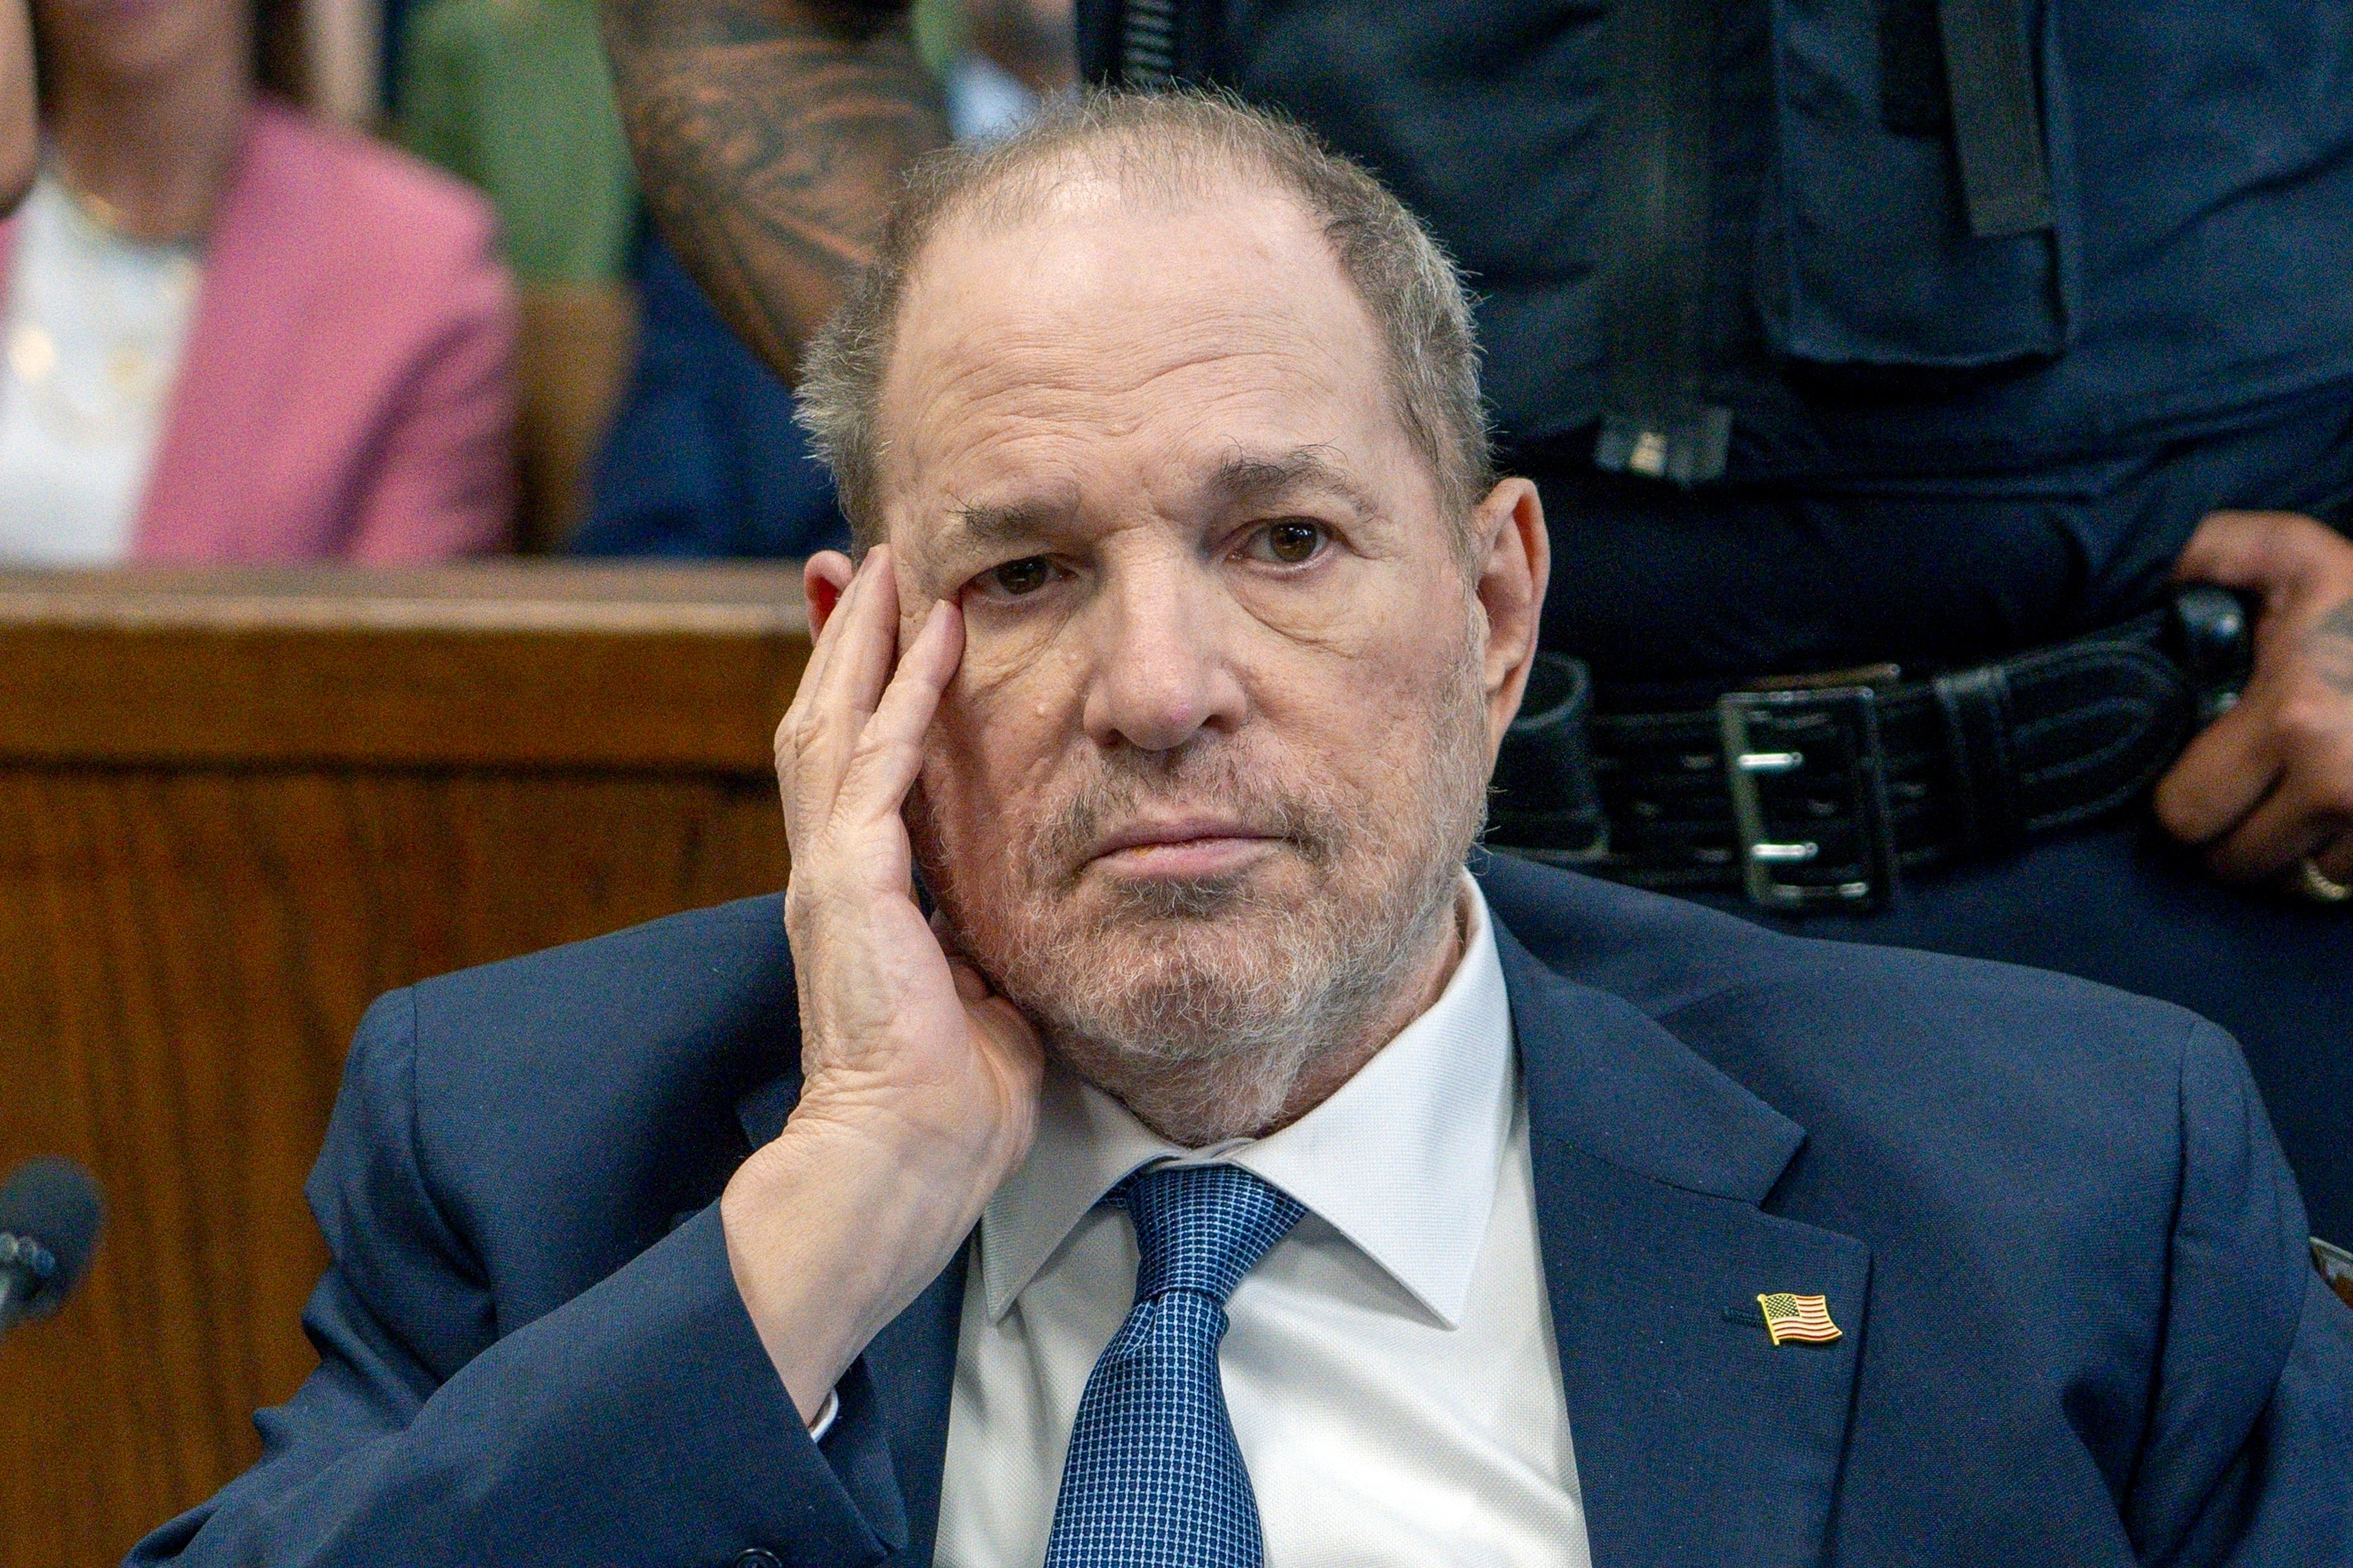 Harvey Weinstein’s attorneys are seeking to have his sexual assault convictin in California overturned and are requesting a new trial